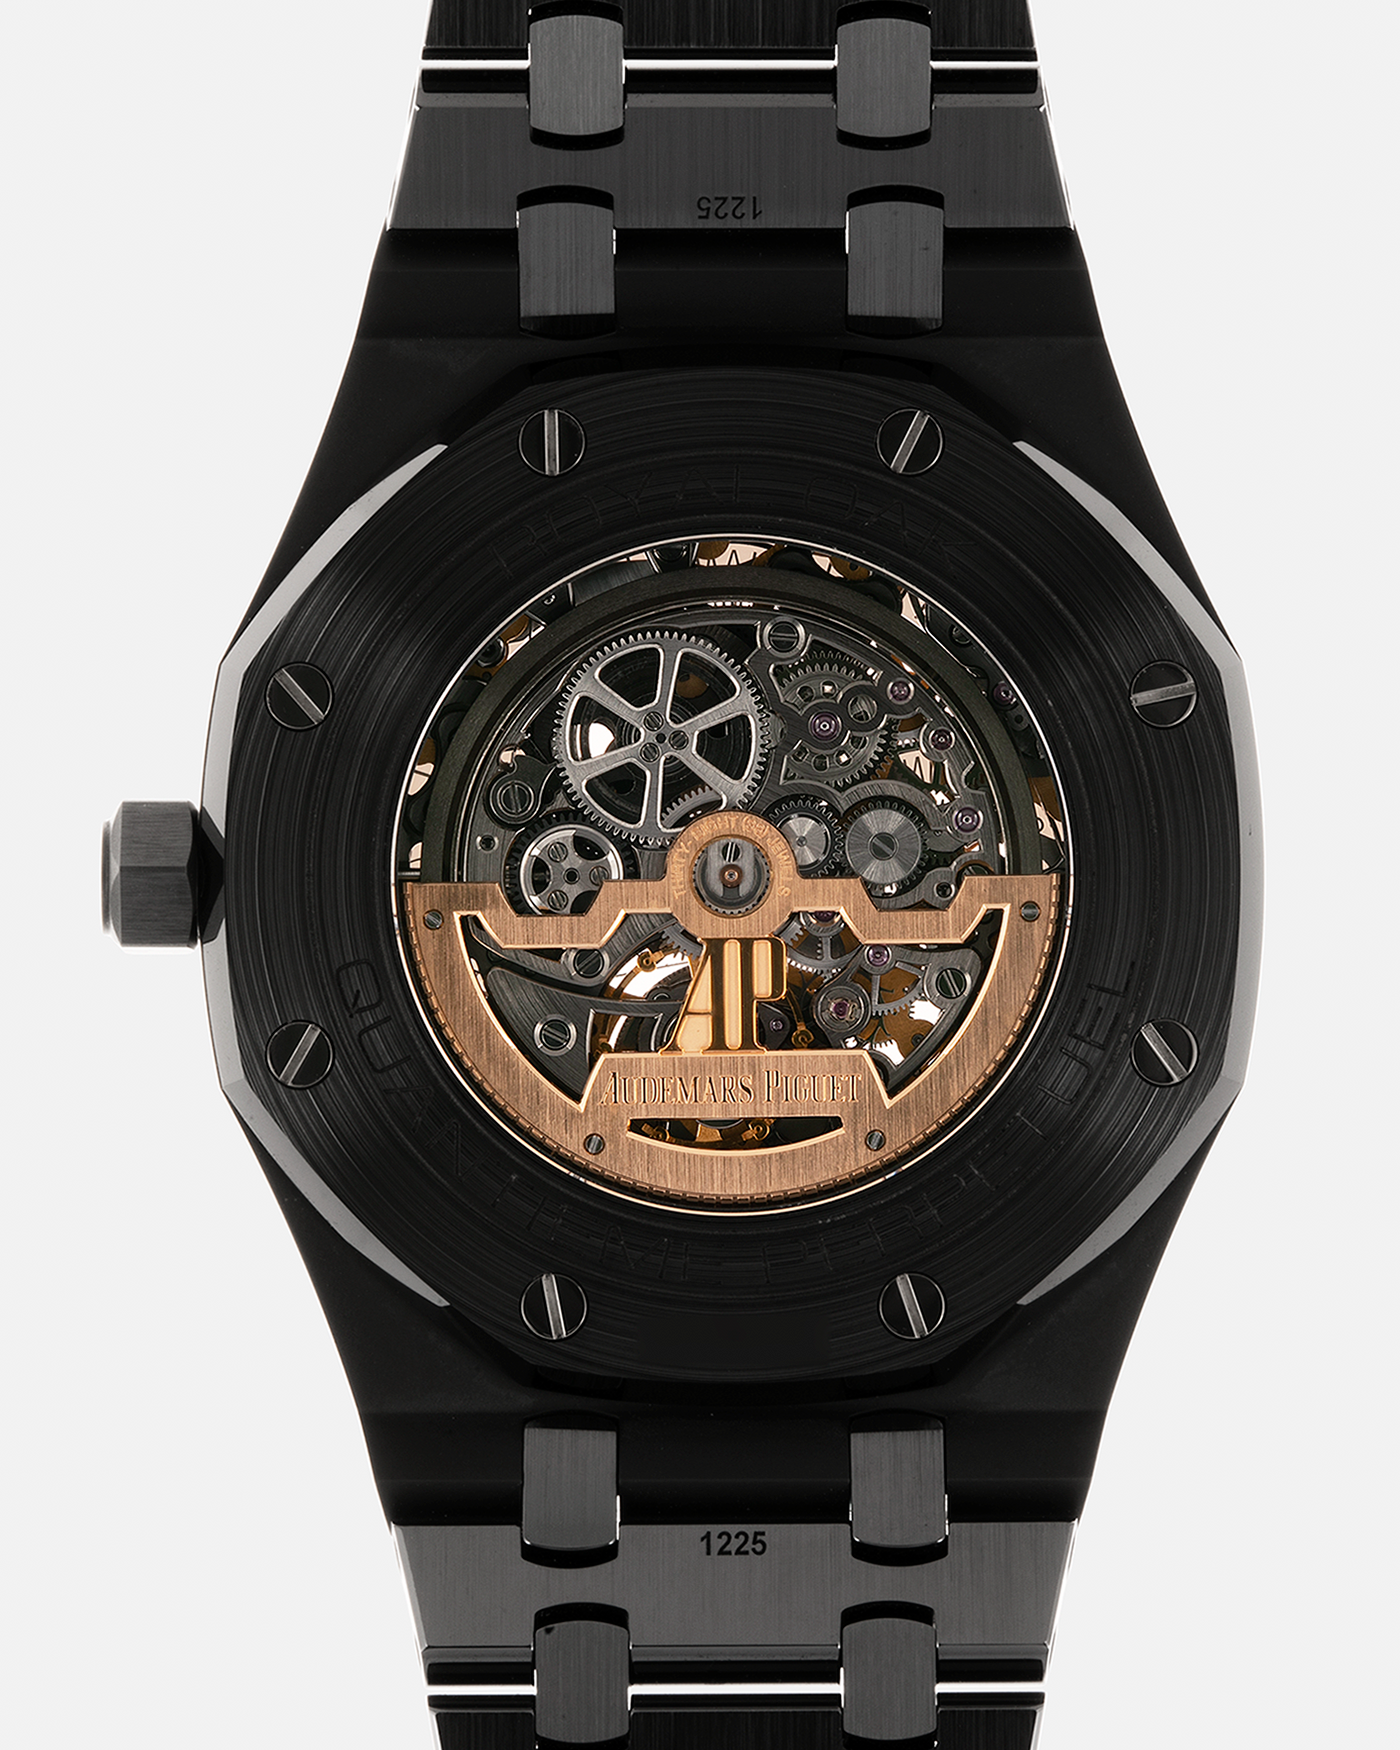 Brand: Audemars Piguet Year: 2021 Model: Royal Oak Perpetual Calendar Openworked, Boutique-only Edition Reference Number: 26585CE Material: Ceramic Movement: Audemars Piguet Cal. 5135, Self-Winding Case Dimensions: 41mm x 9.9mm Bracelet: Audemars Piguet Integrated Black Ceramic Bracelet with Signed Titanium Clasp